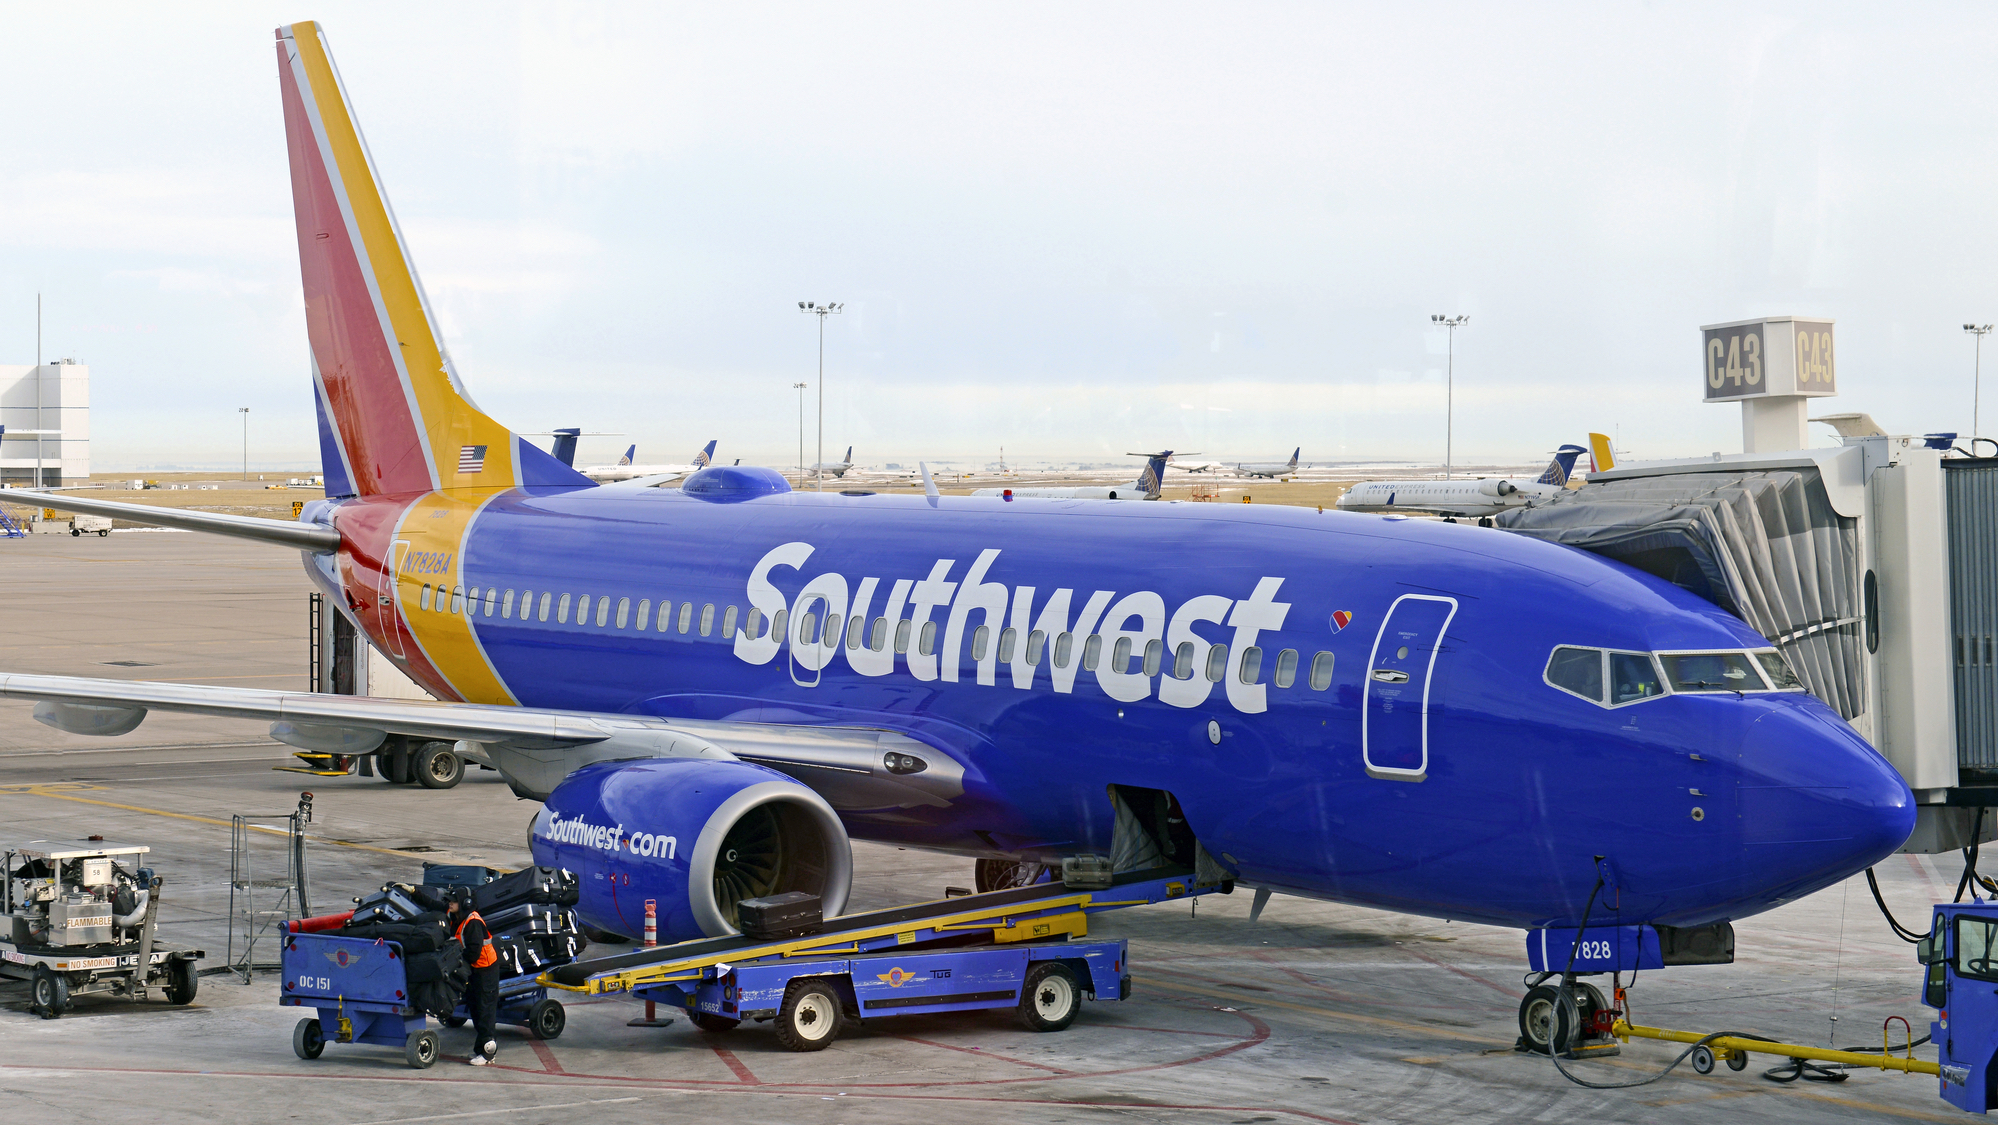 Southwest plane being loaded with baggage on tarmac